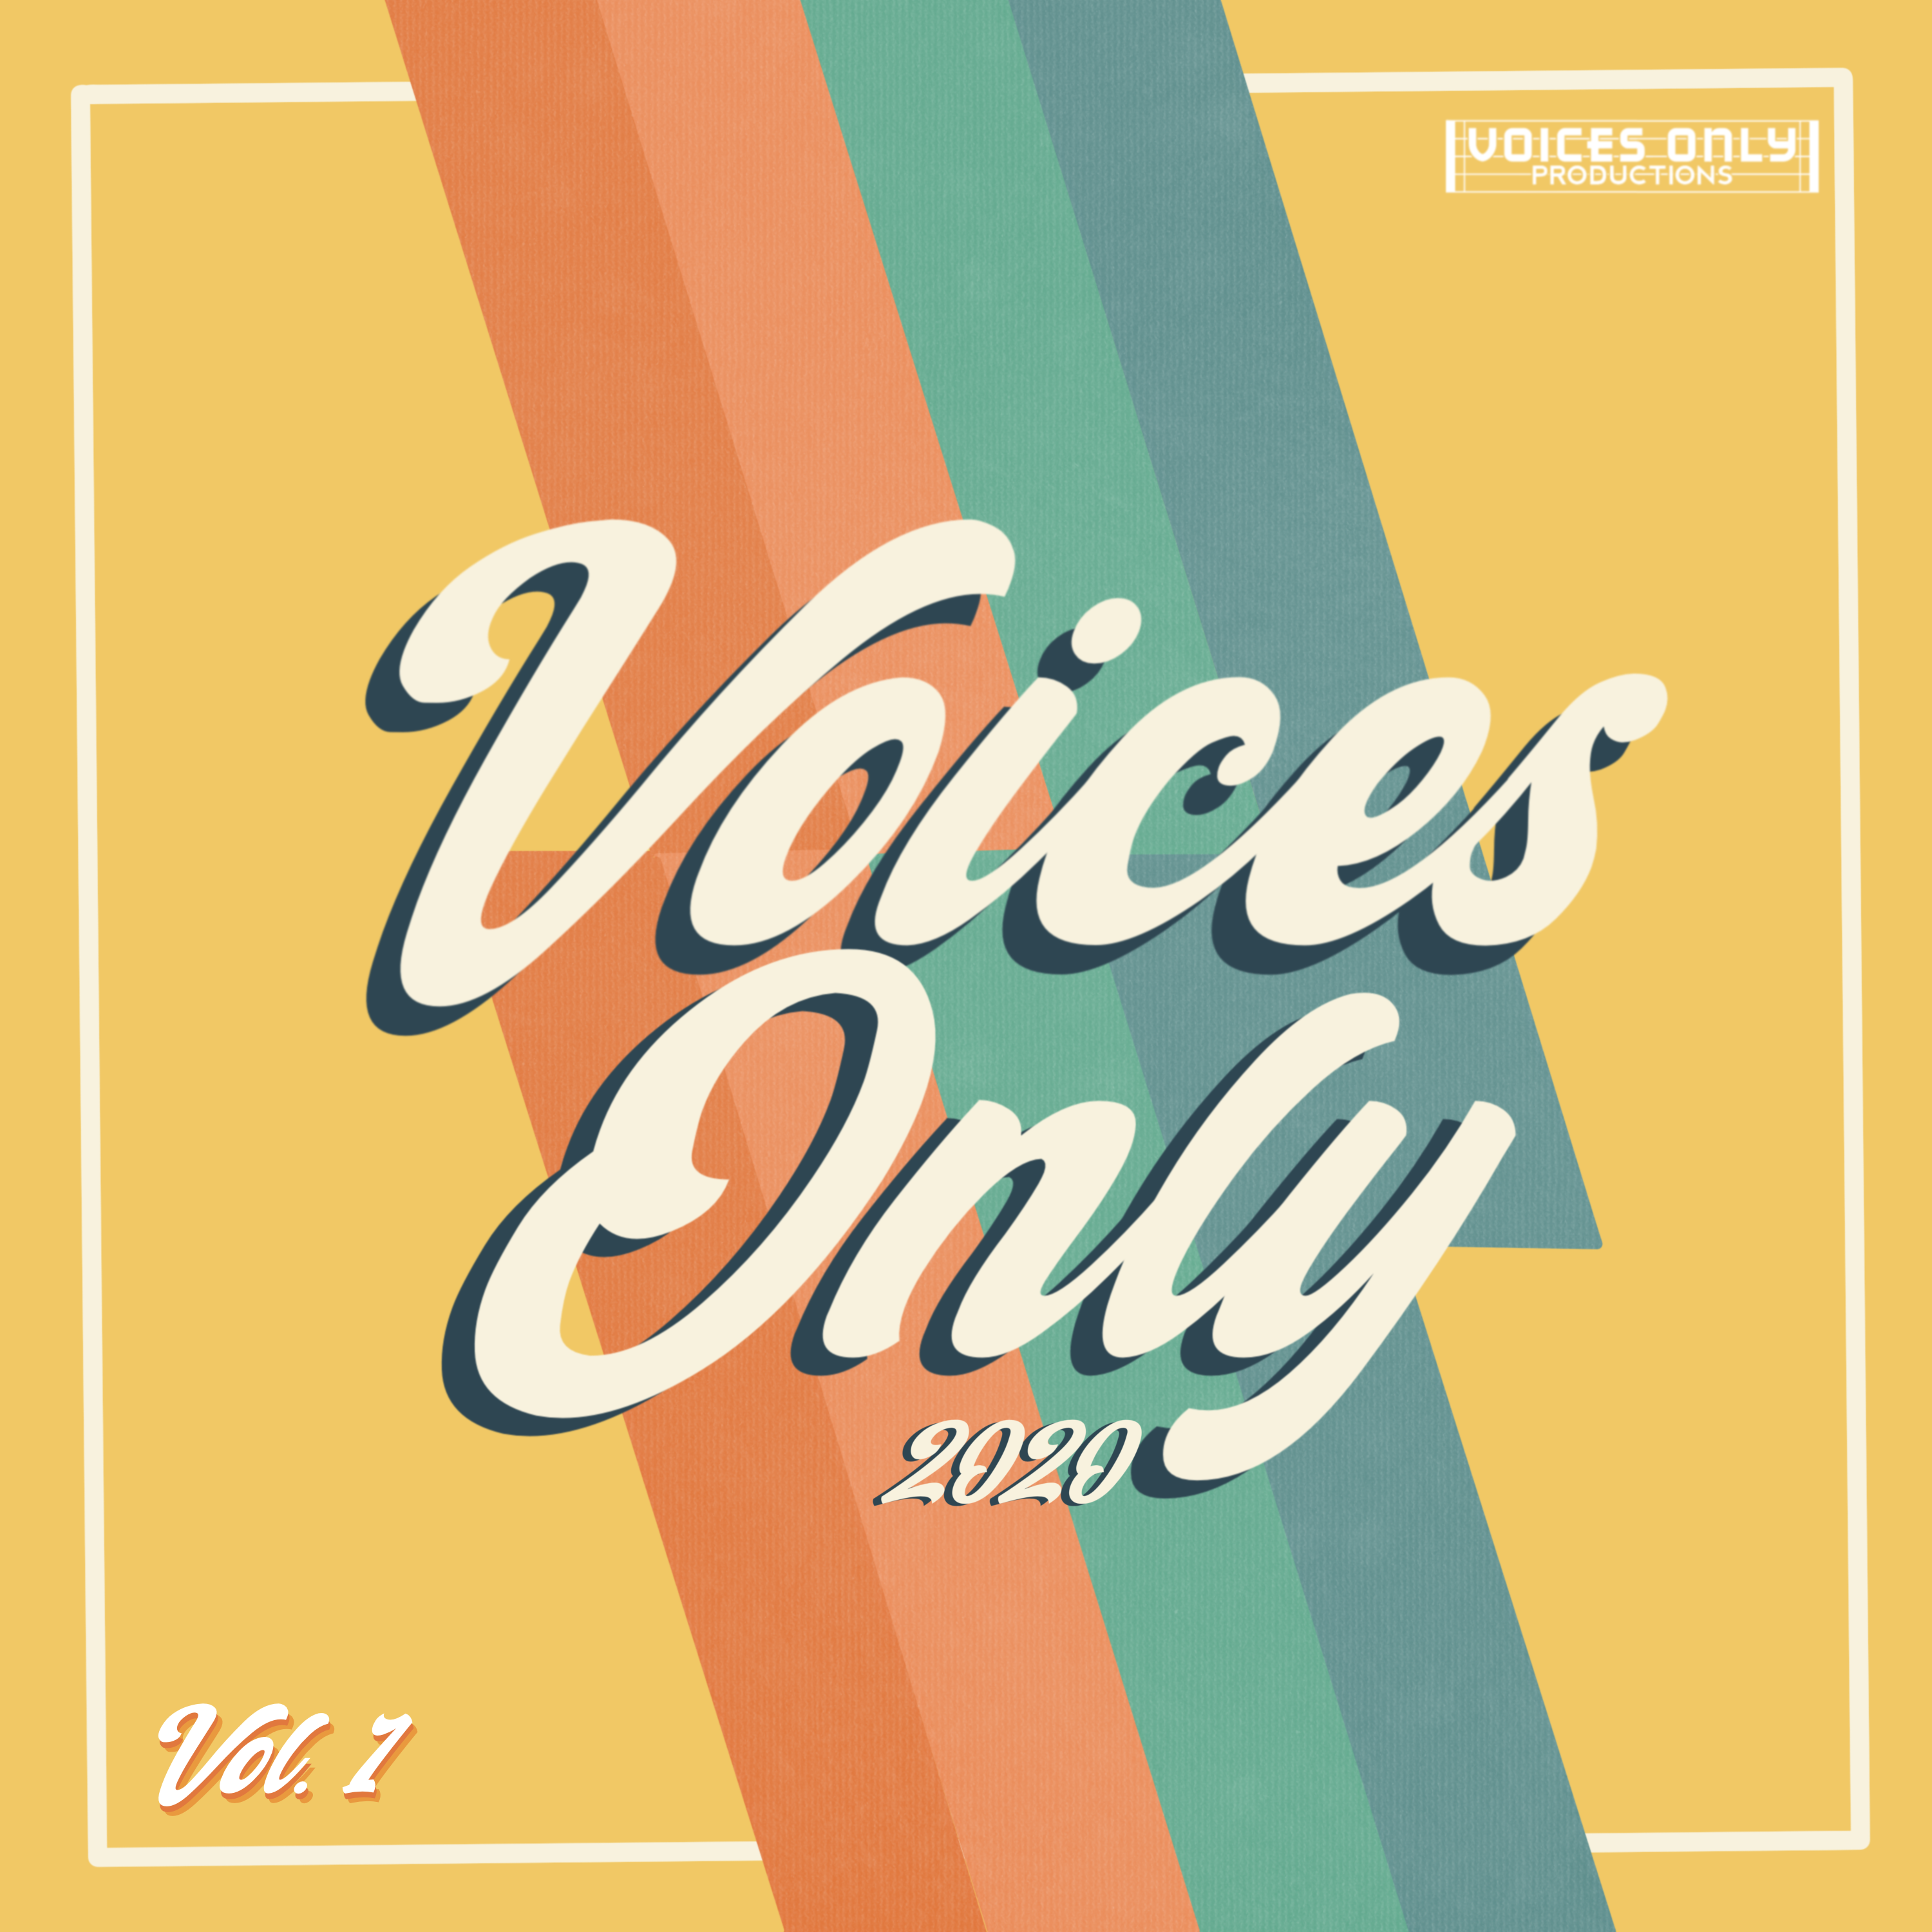 Download Voices Only 2020 now